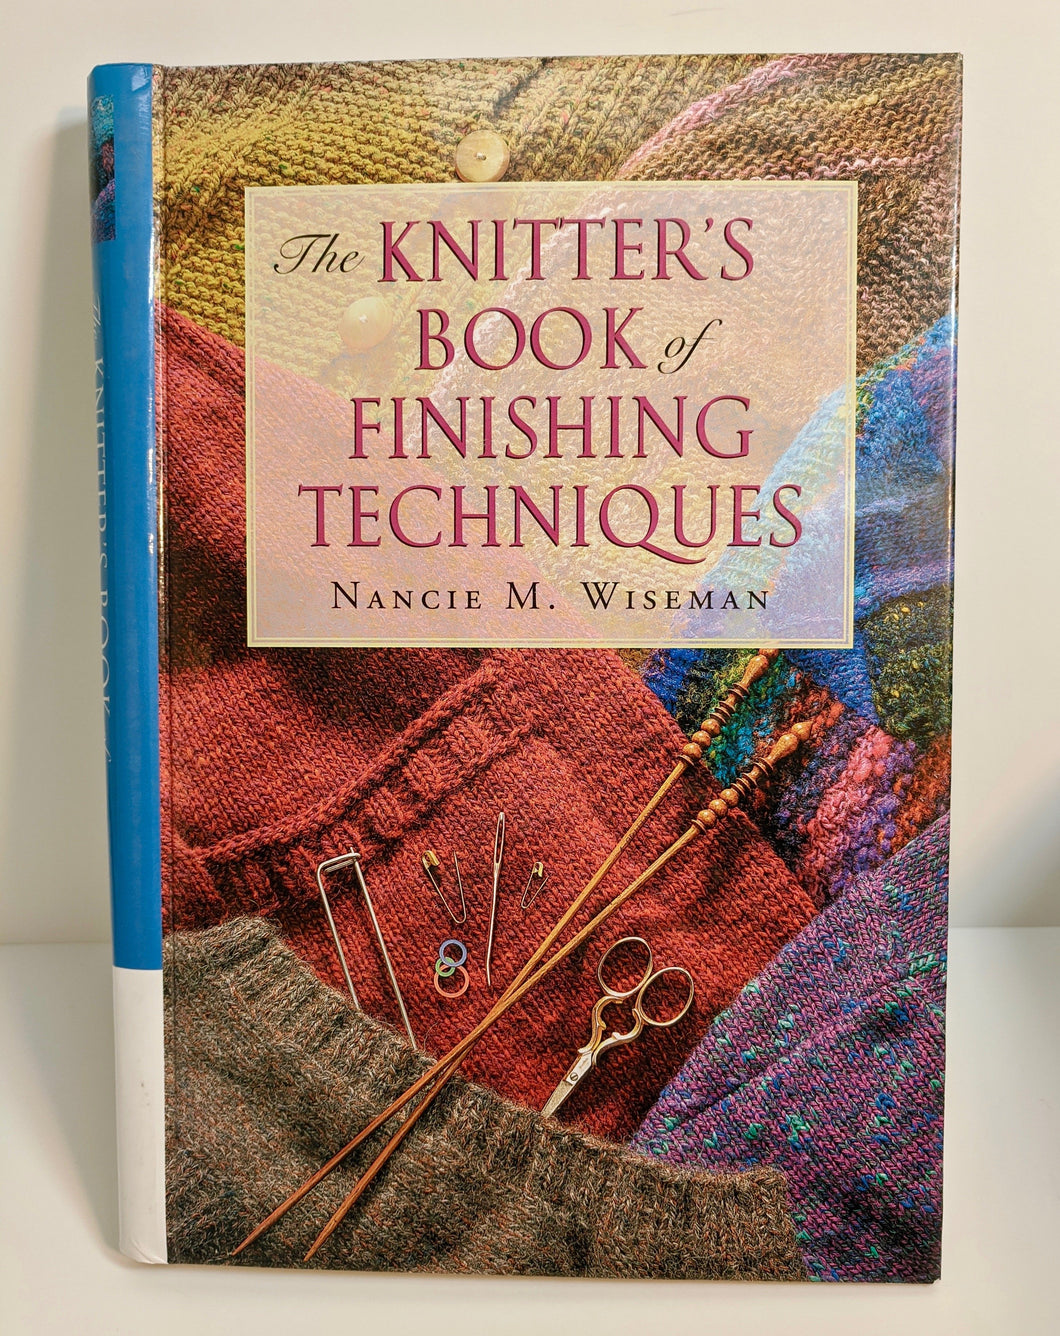 The Knitter's Book of Finishing Techniques, by Nancie W. Wiseman